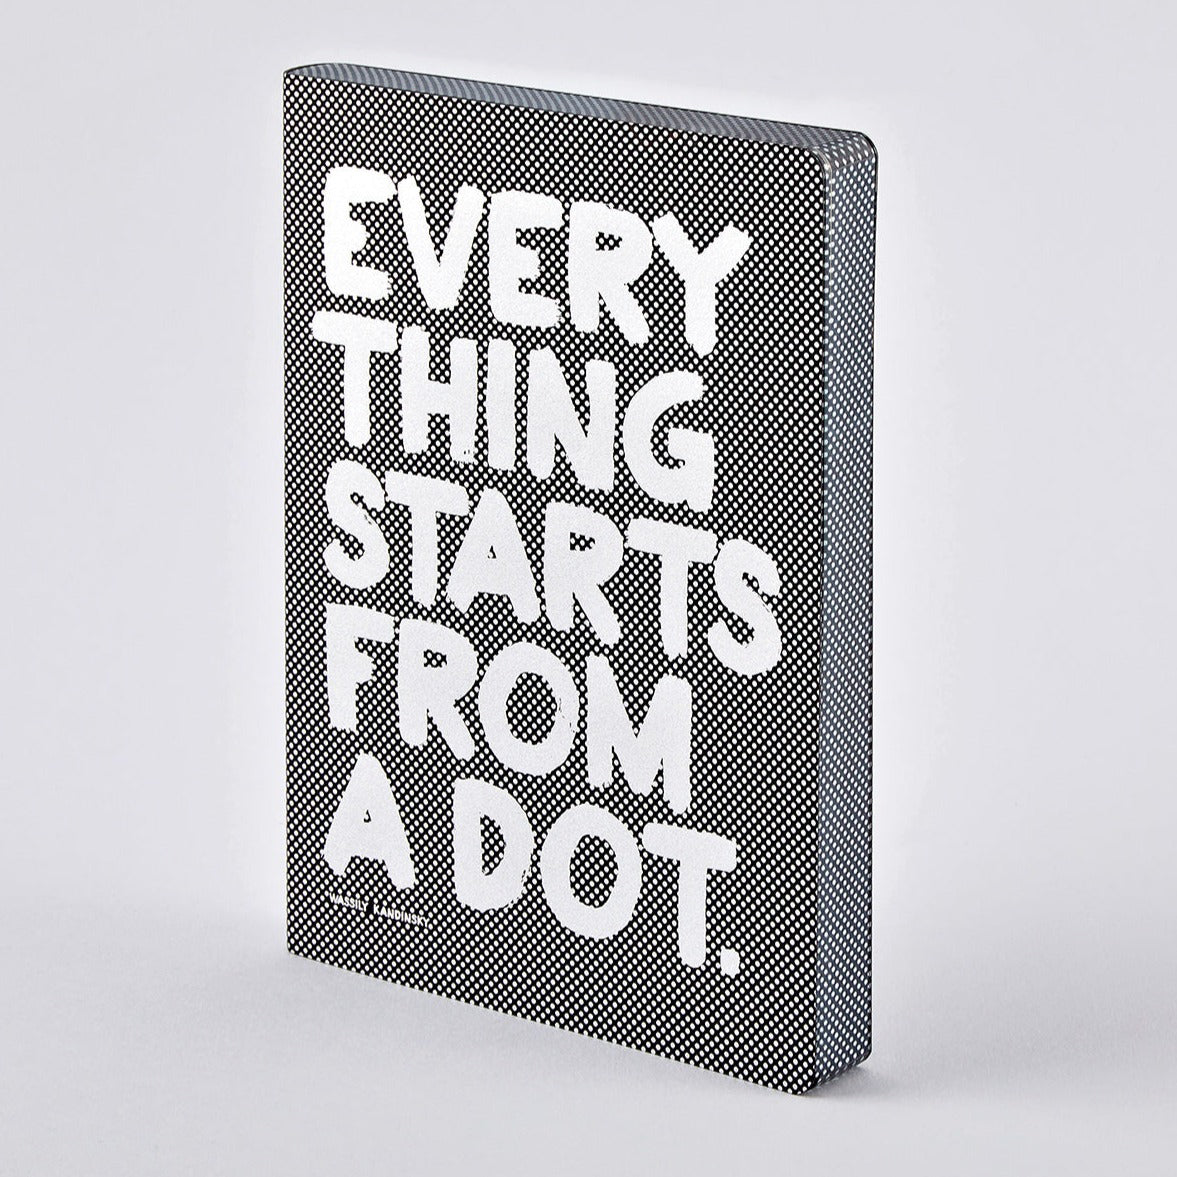 GRAPHIC L EVERYTHING STARTS FROM A DOT